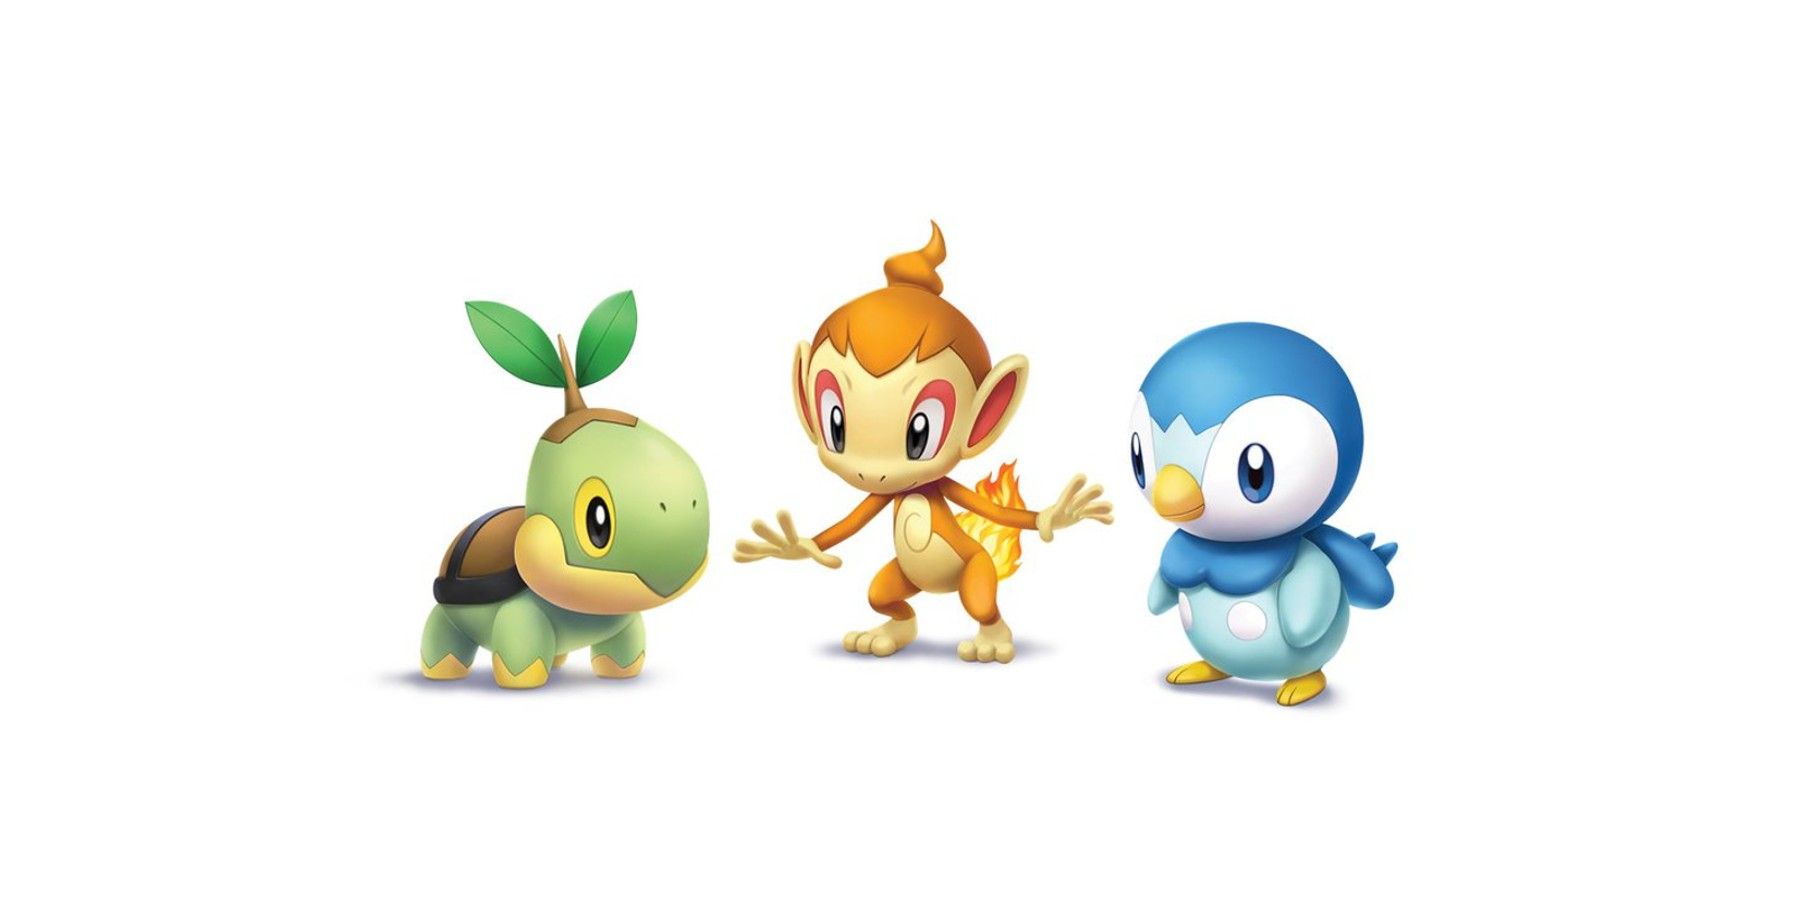 Sinnoh starter Pokemon Turtwig, Chimchar, and Piplup stand in a line.